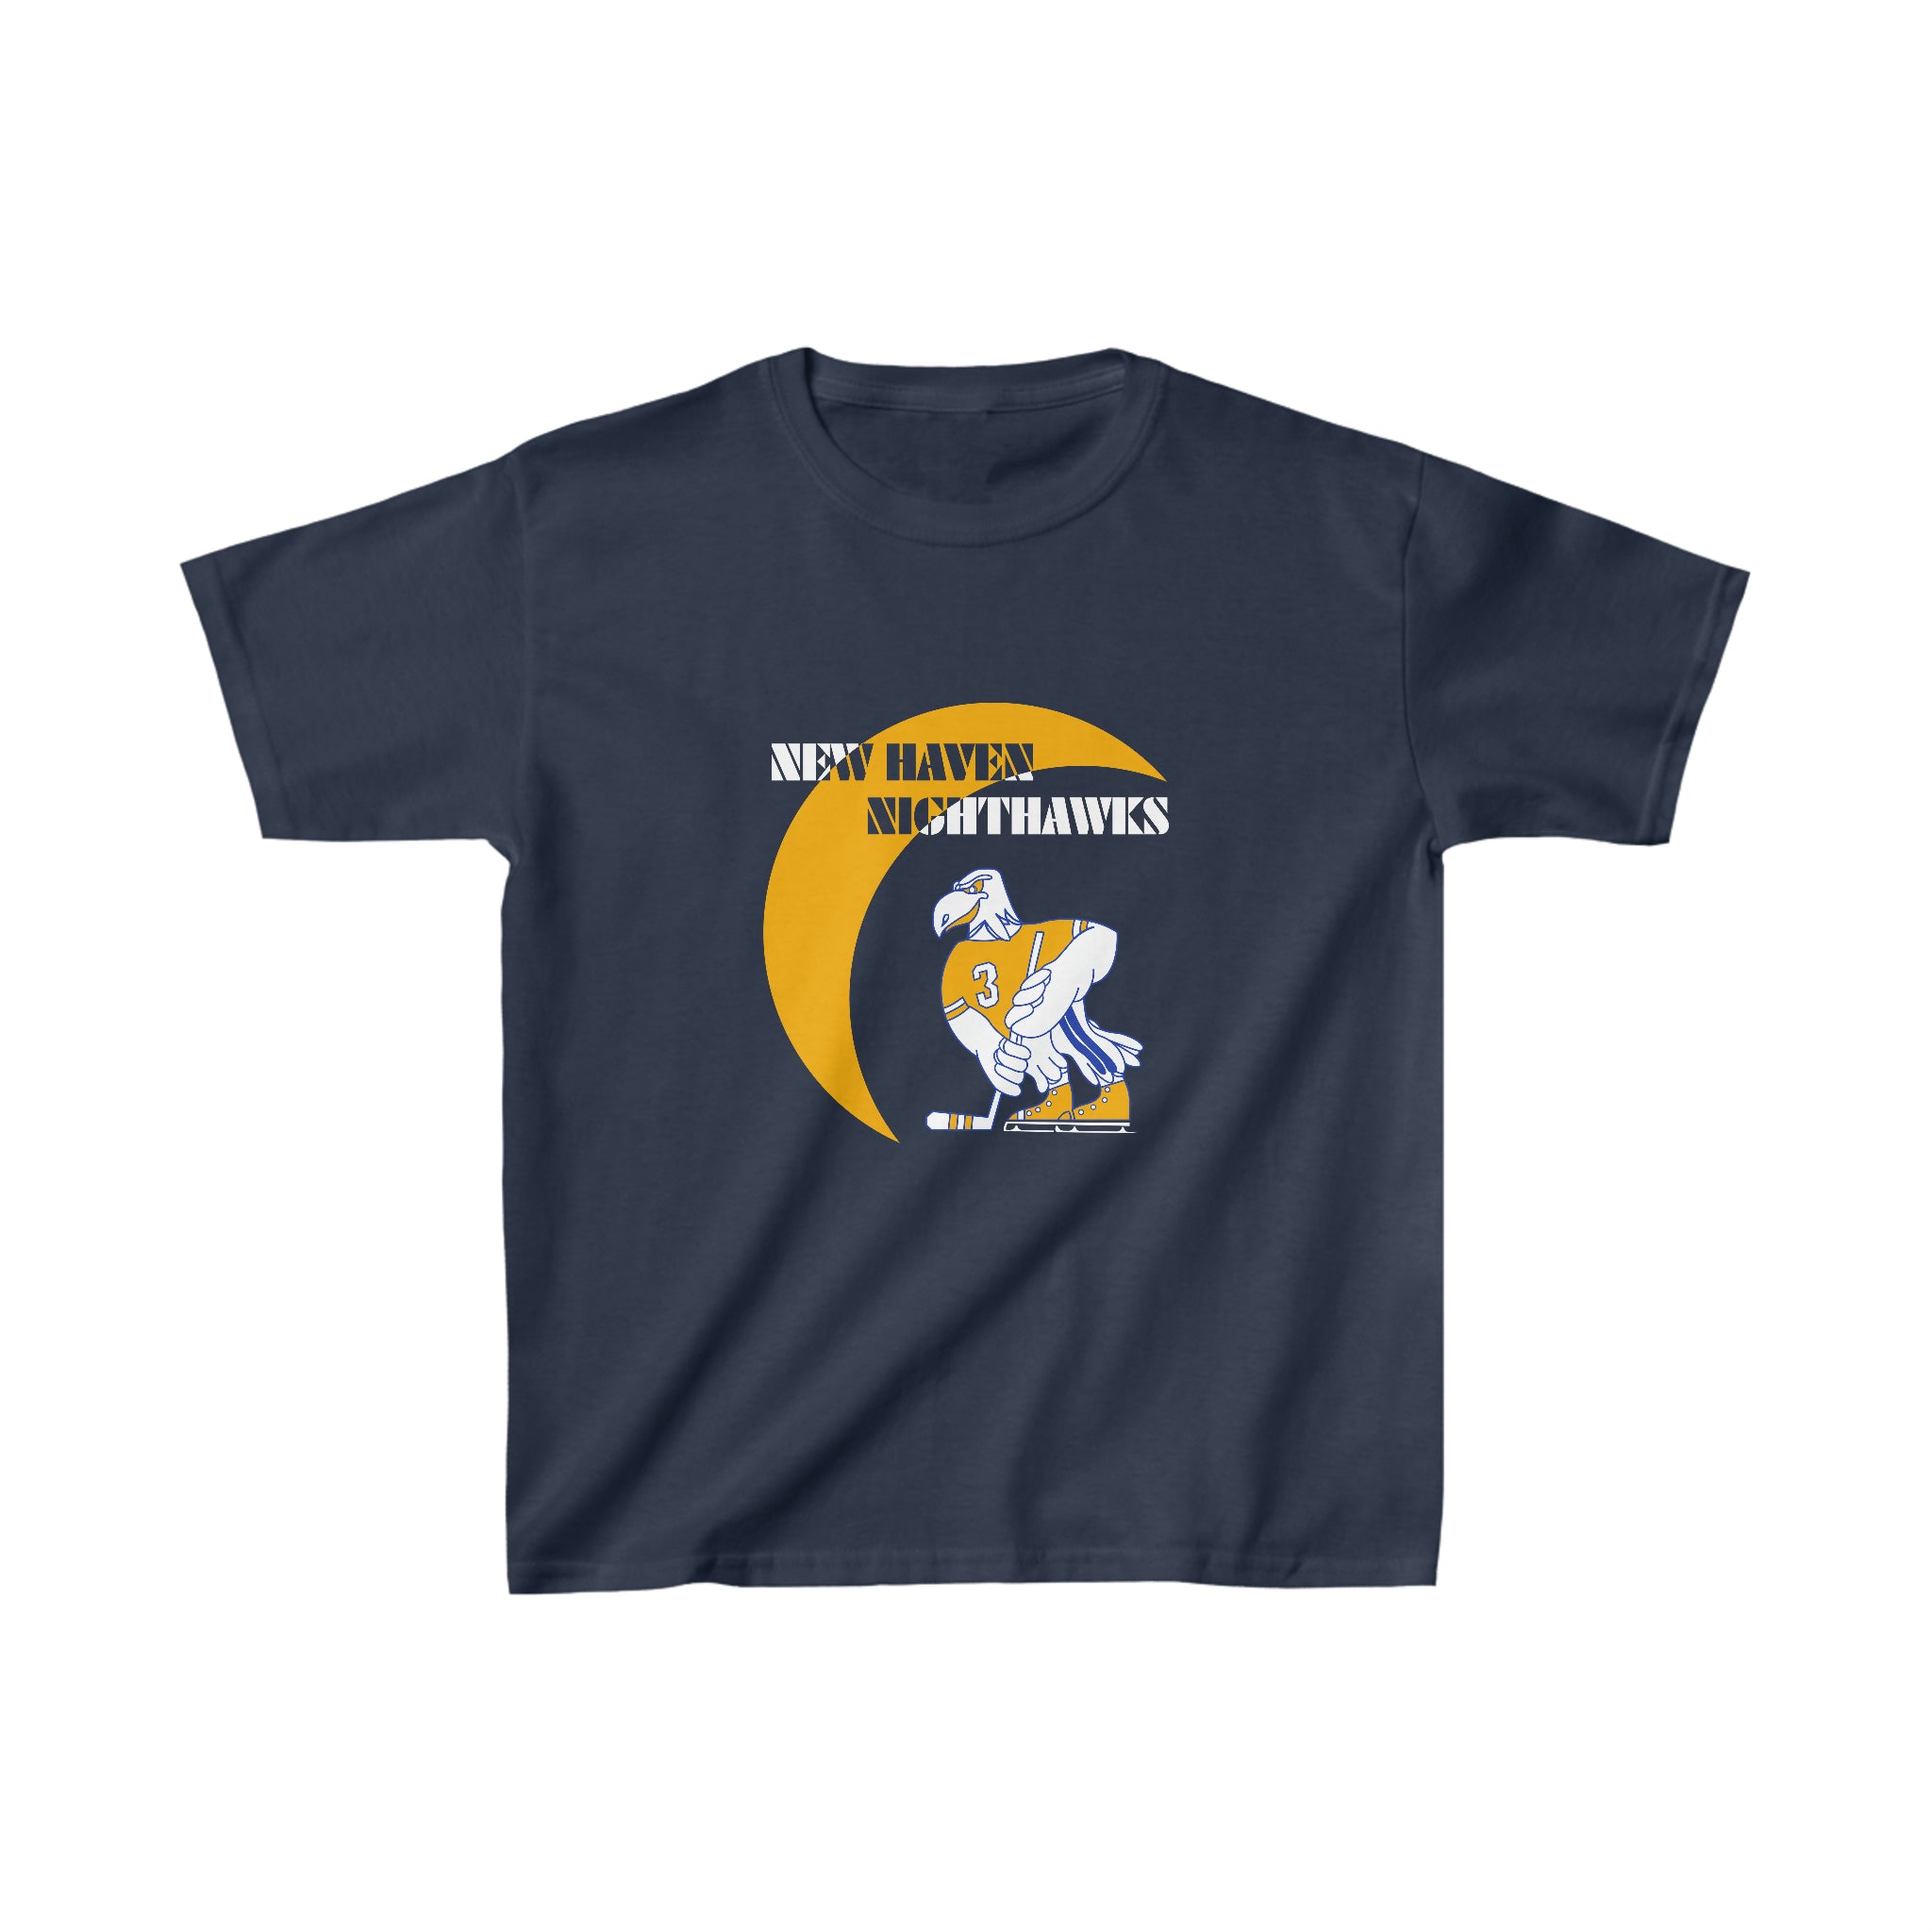 New Haven Nighthawks 1970s T-Shirt (Youth)